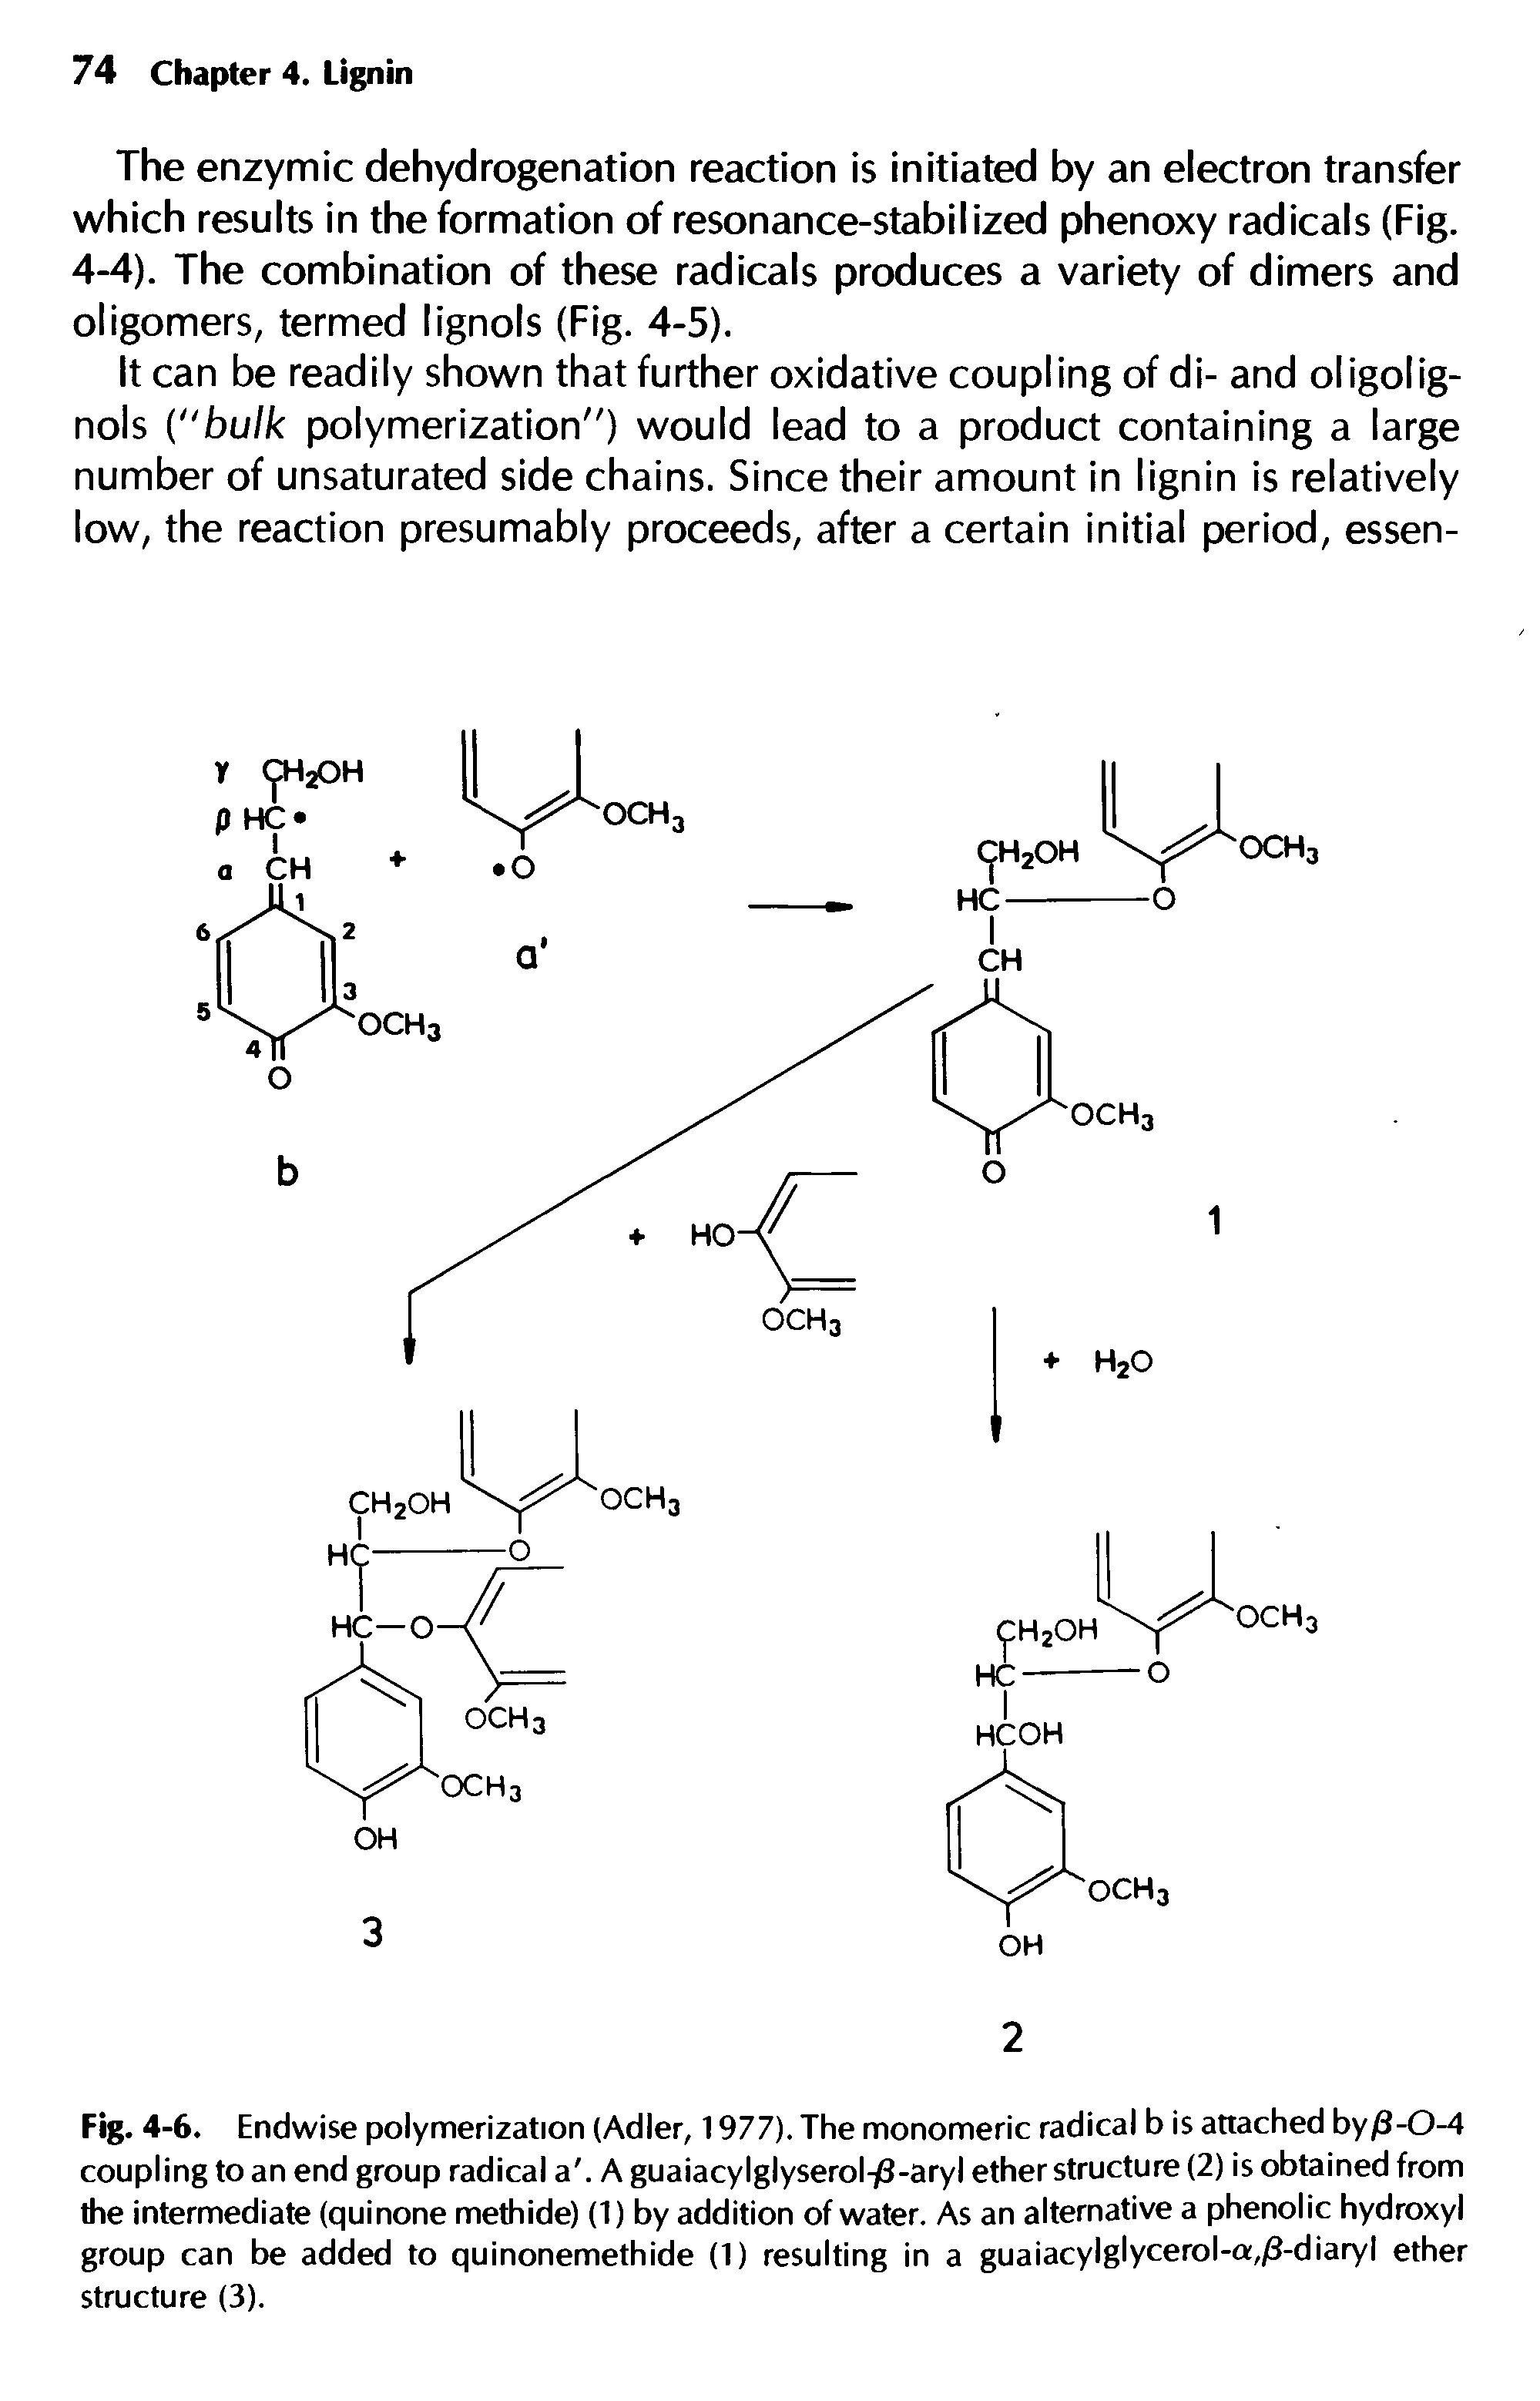 Fig. 4-6. Endwise polymerization (Adler, 1977). The monomeric radical b is attached by/3-0-4 coupling to an end group radical a. A guaiacylglyserol-0-aryl ether structure (2) is obtained from the intermediate (quinone methide) (1) by addition of water. As an alternative a phenolic hydroxyl group can be added to quinonemethide (1) resulting in a guaiacylglycerol-a,/3-diaryl ether structure (3).